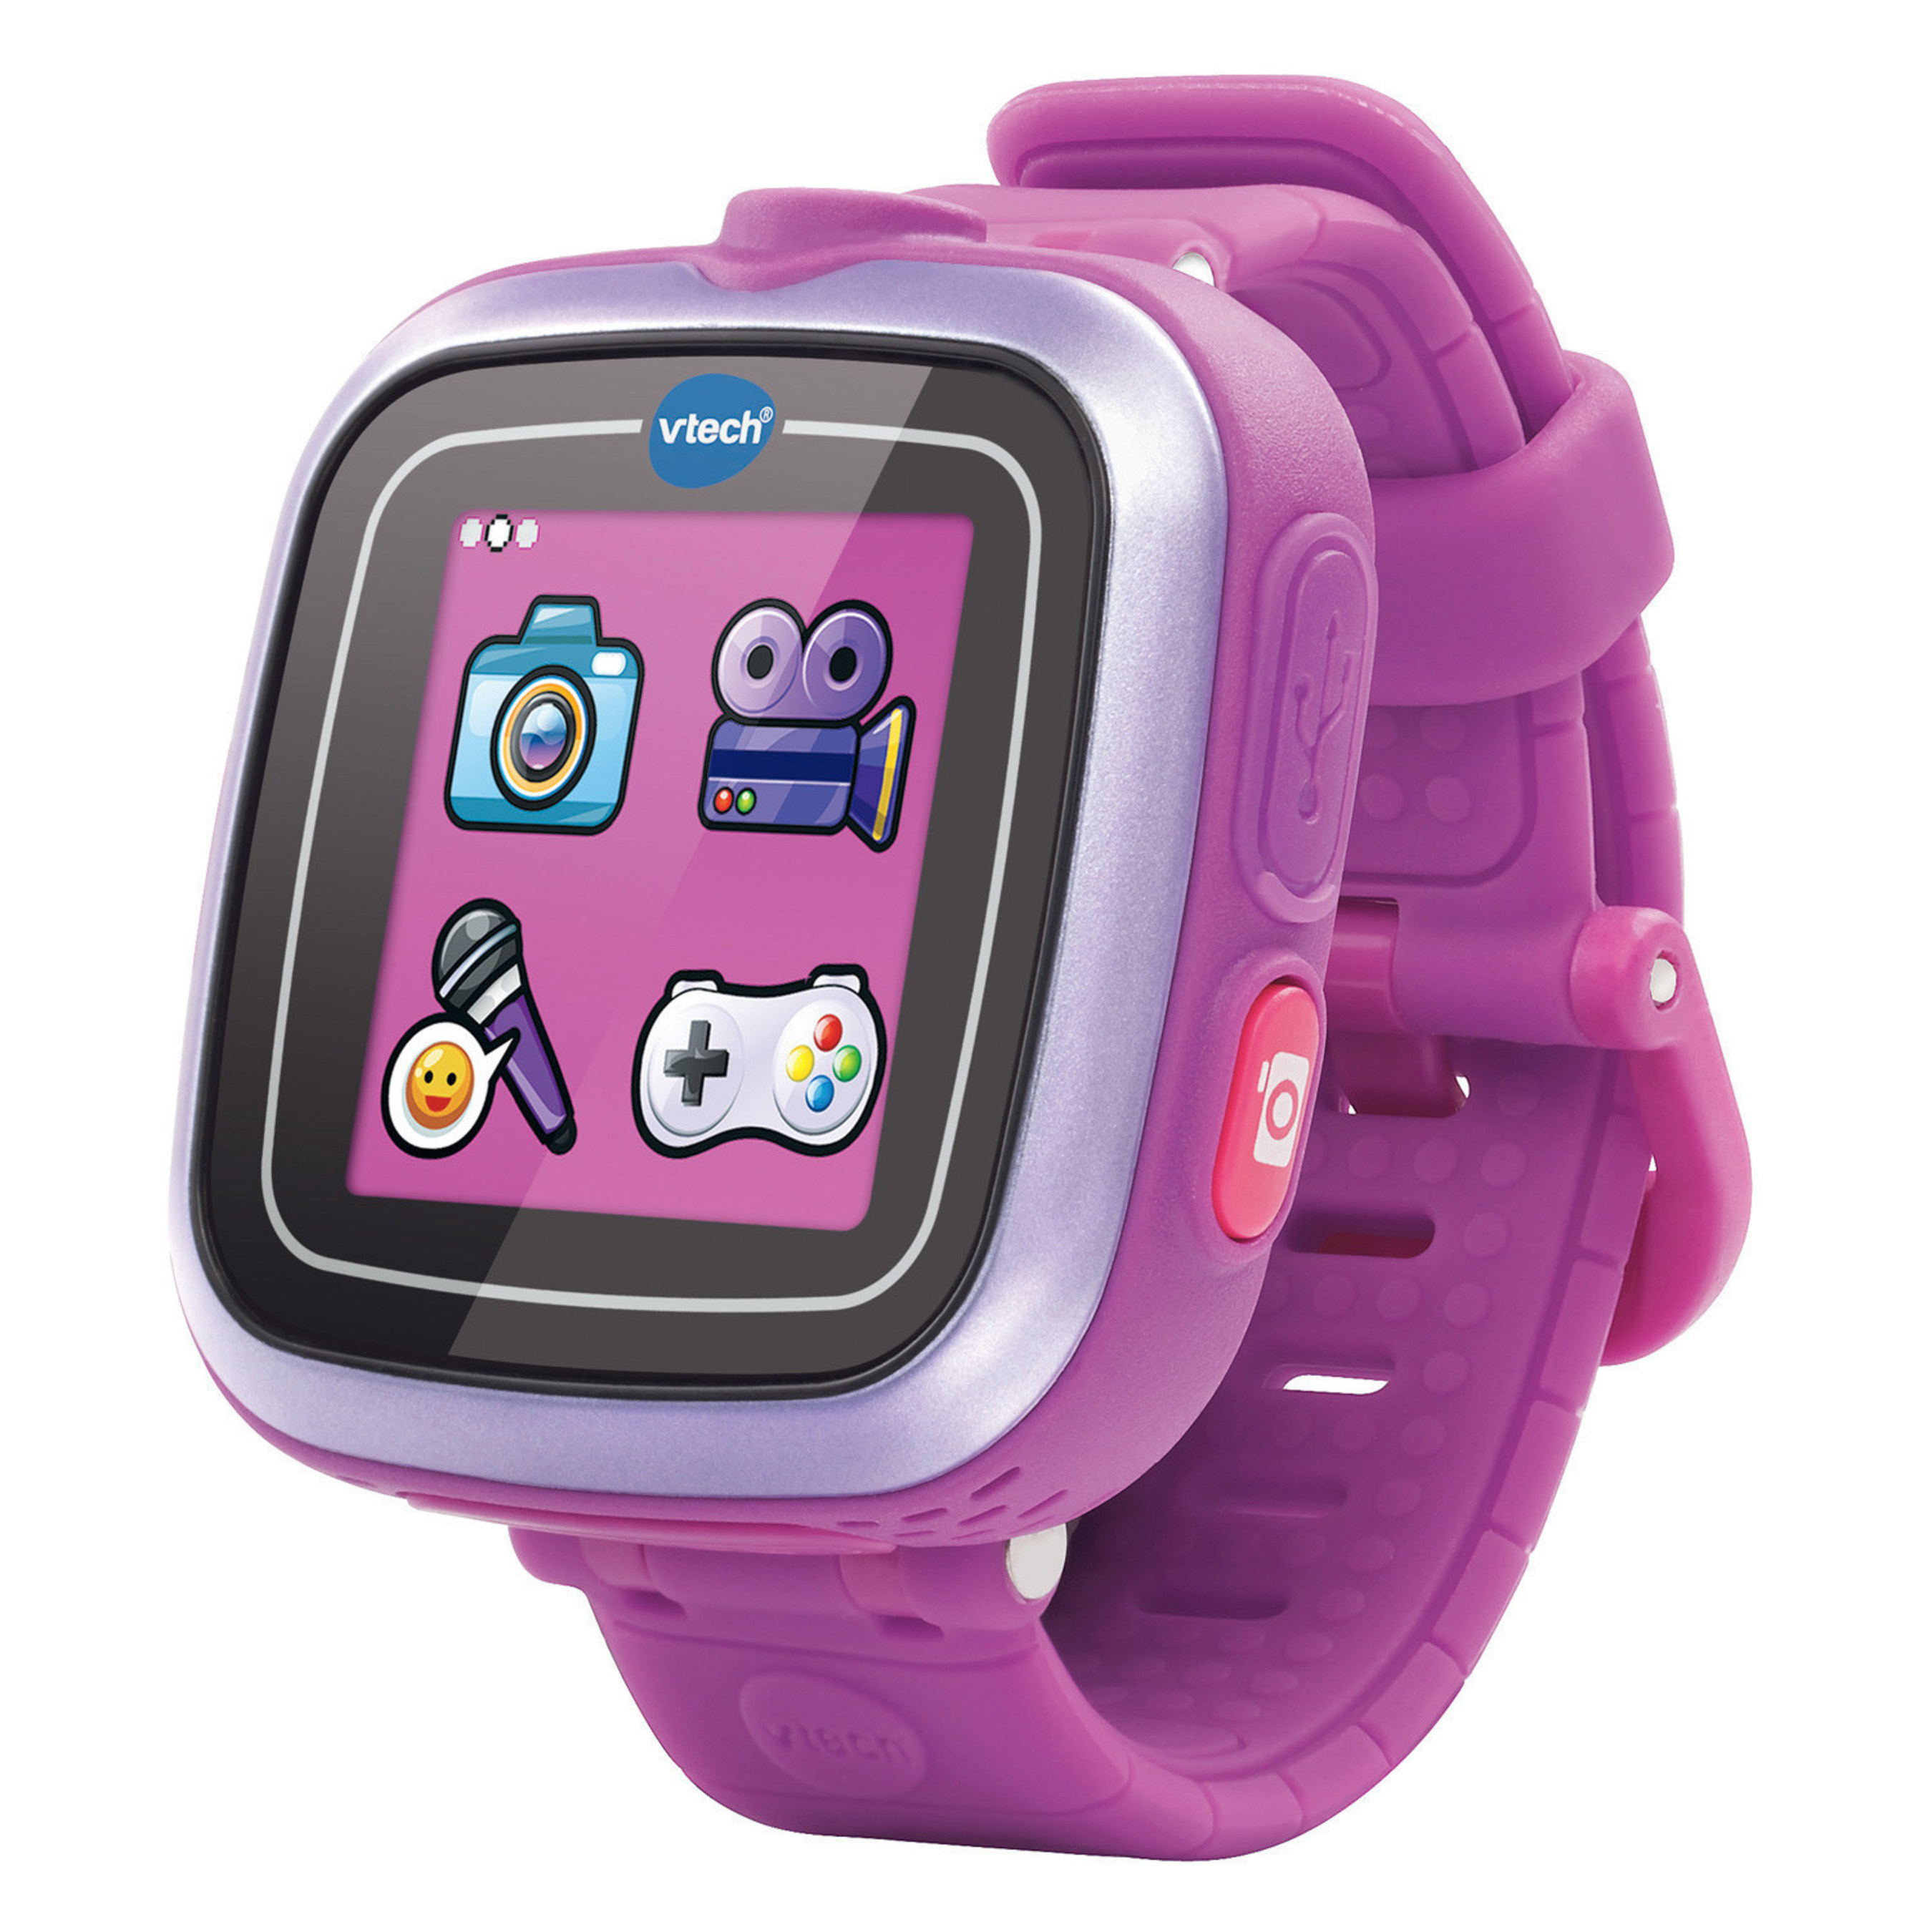 VTech Kidizoom Smartwatch now available in exclusive Vivid Violet color on www.vtechkids.com.